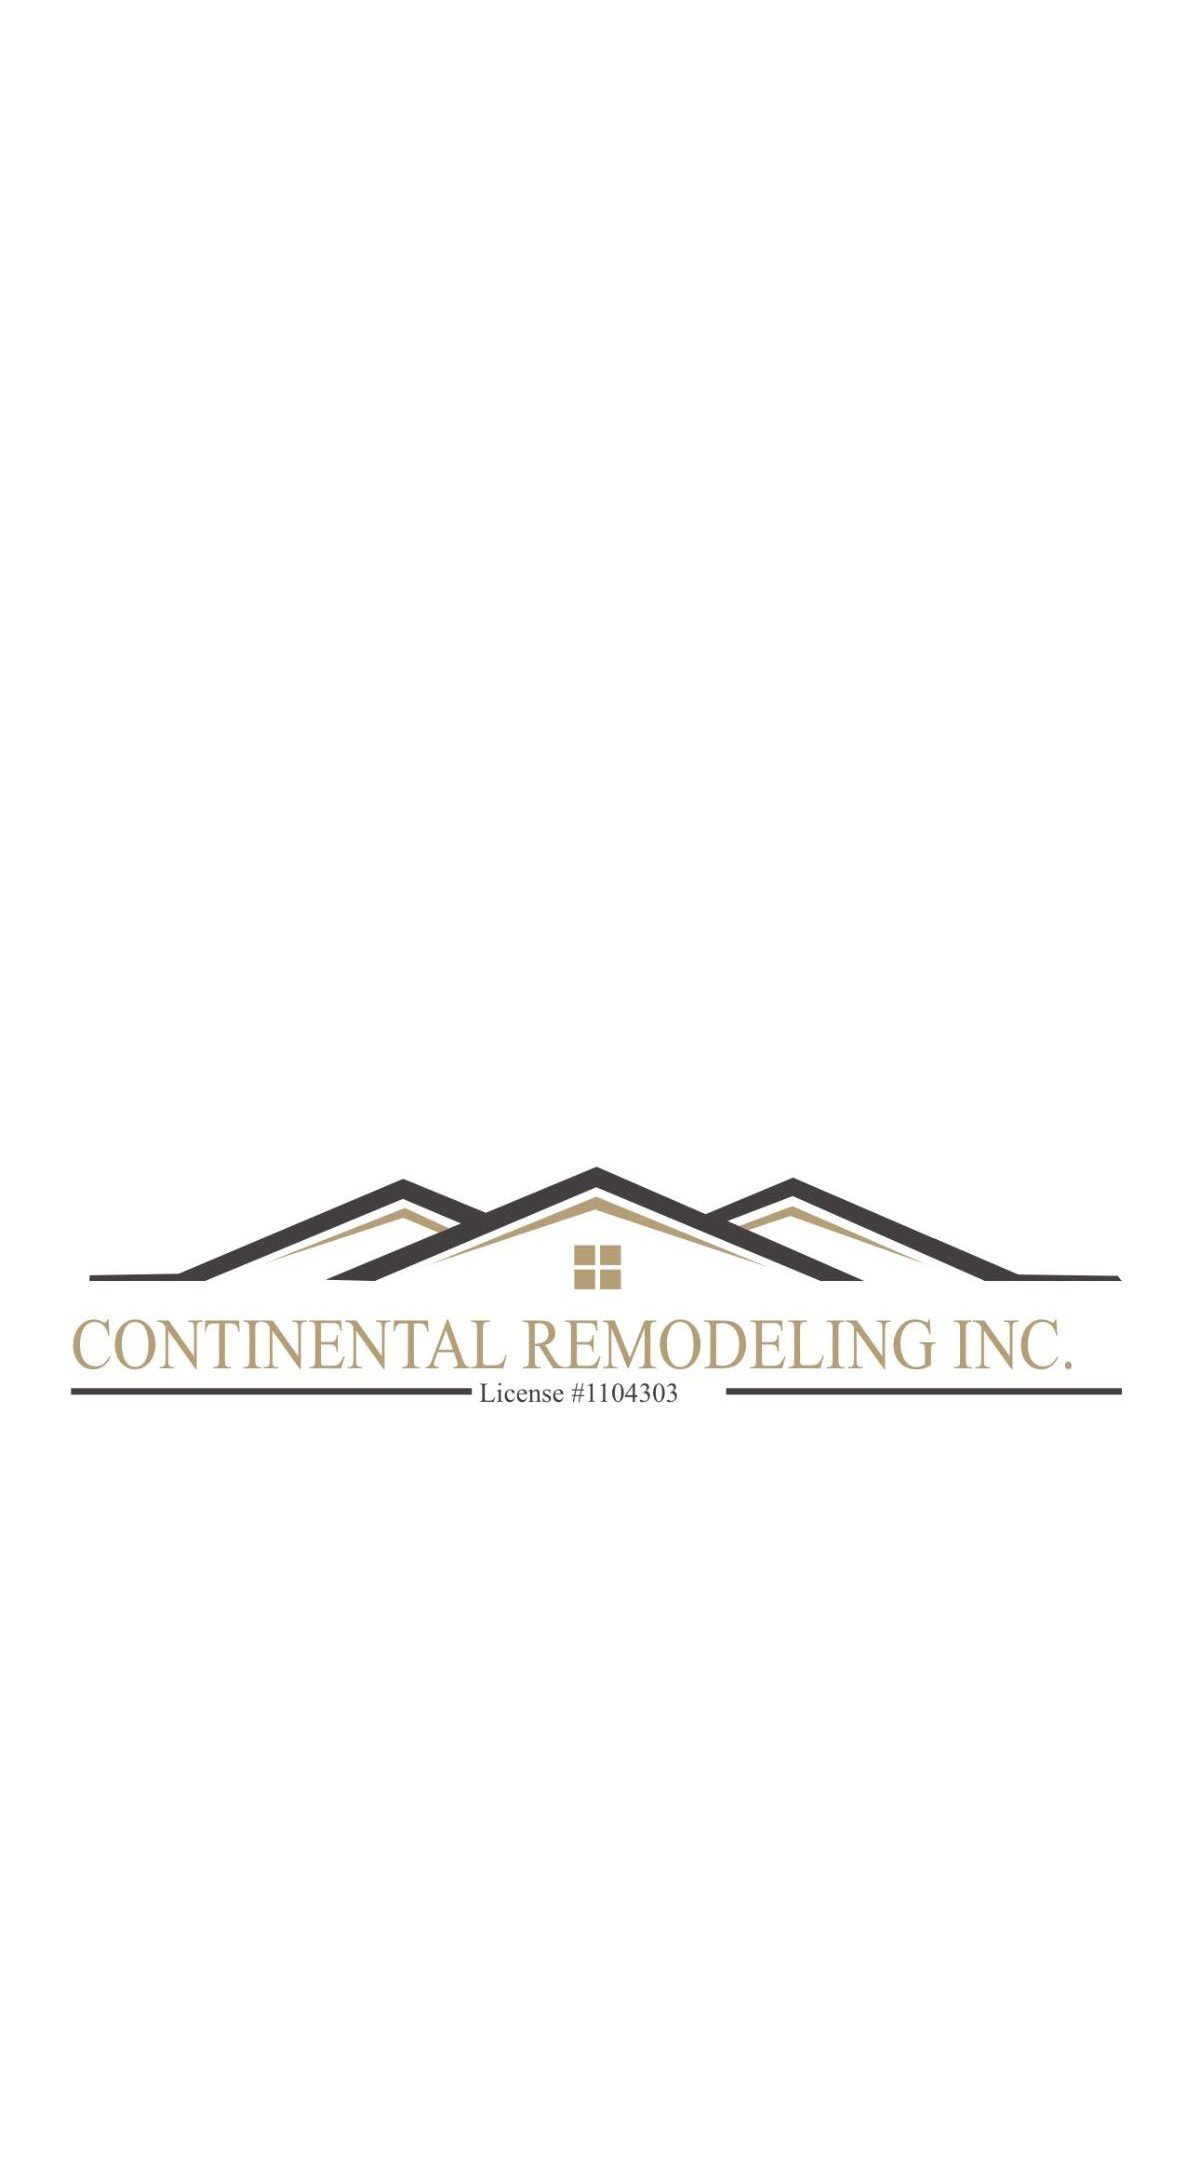 CONTINENTAL REMODELING INC Logo